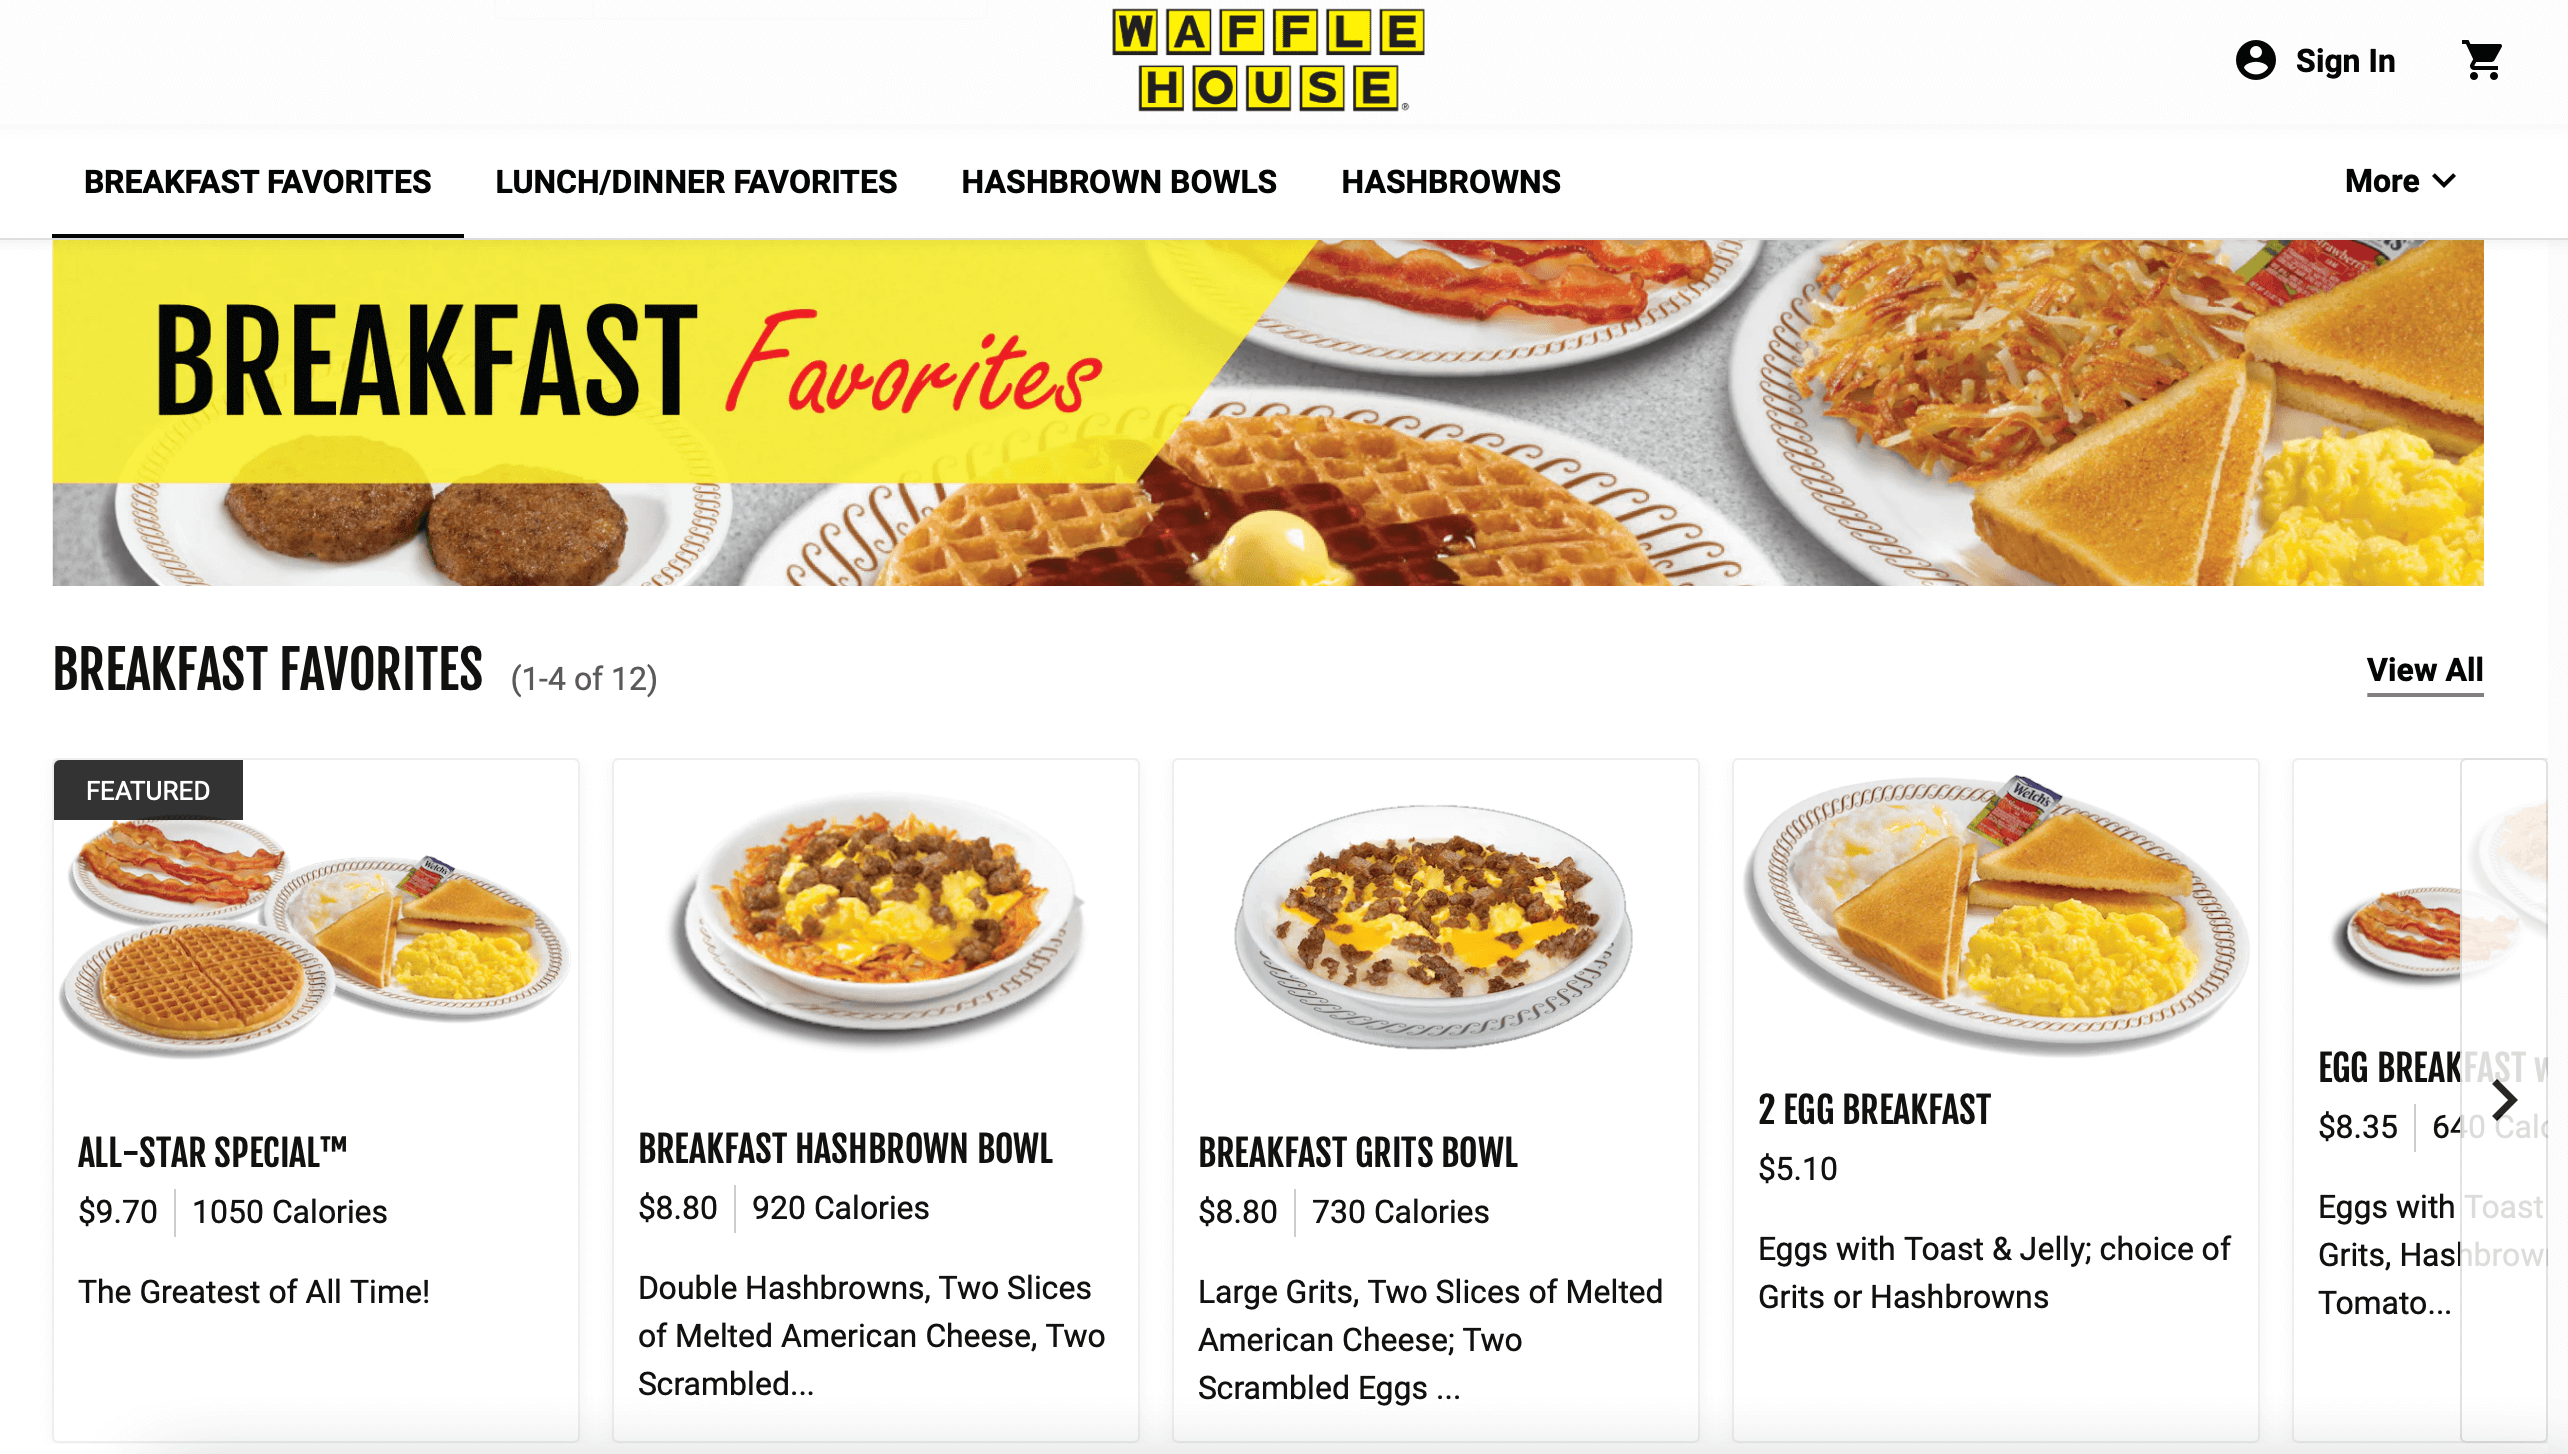 Updated Waffle House Menu Prices + Latest Discounts (2022)